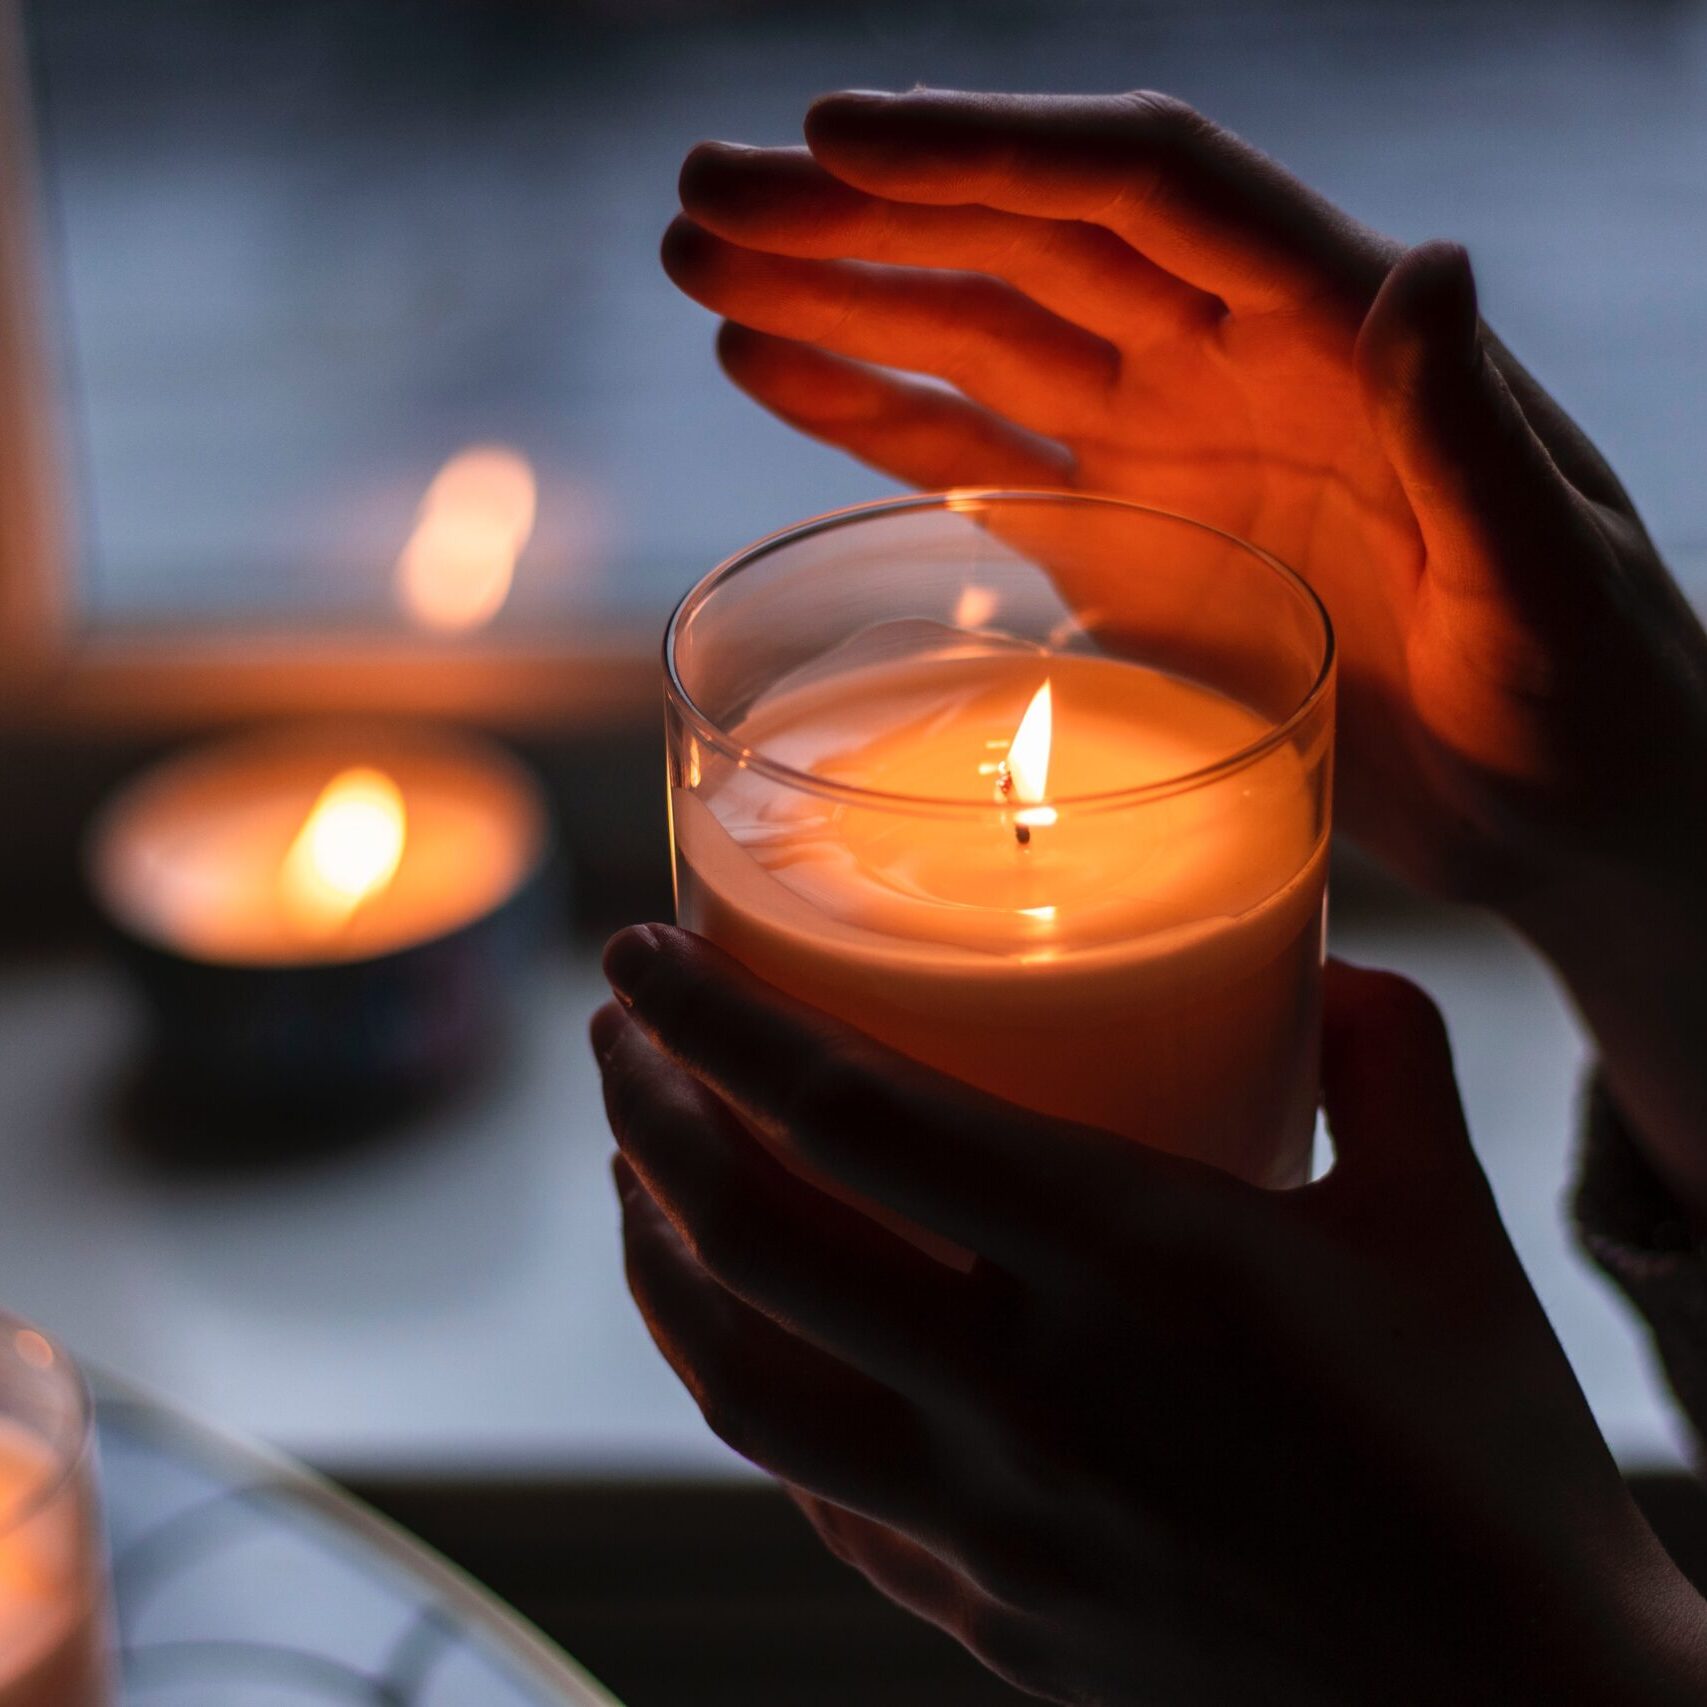 Lighting candles in your home can be an unnecessary risk